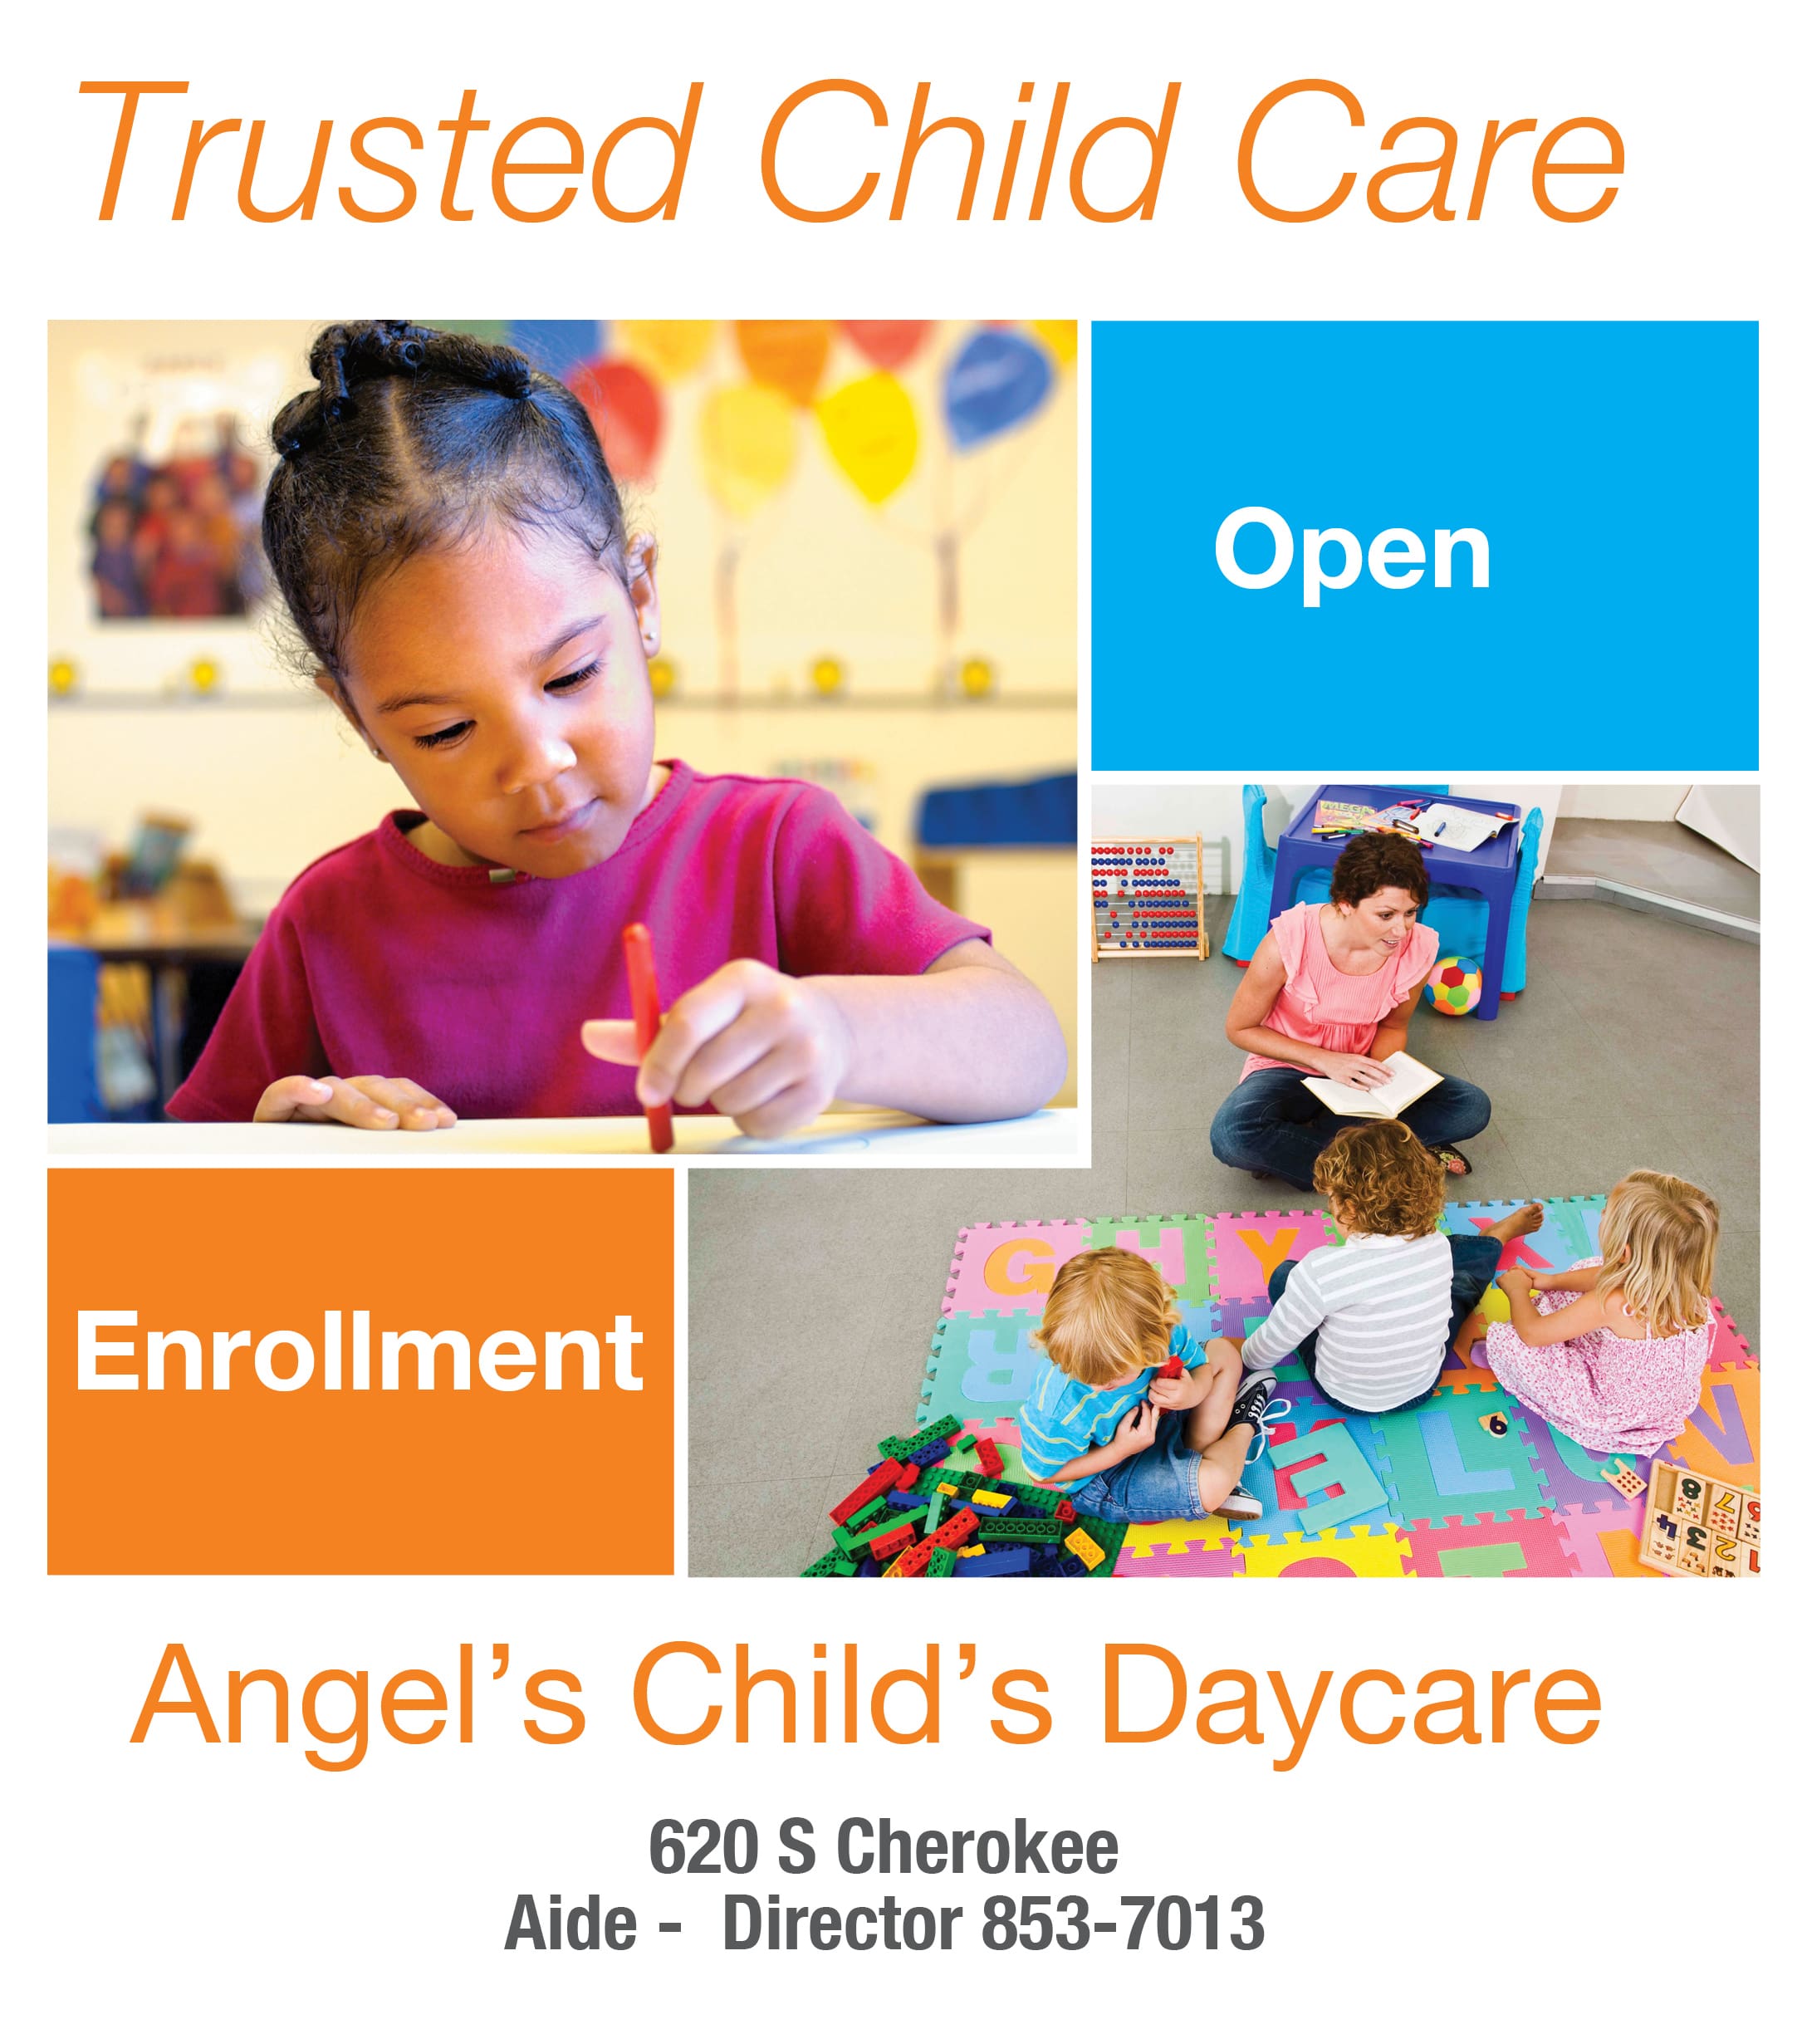 OPEN ENROLLMENT AT ANGEL’S CHILD’S DAYCARE